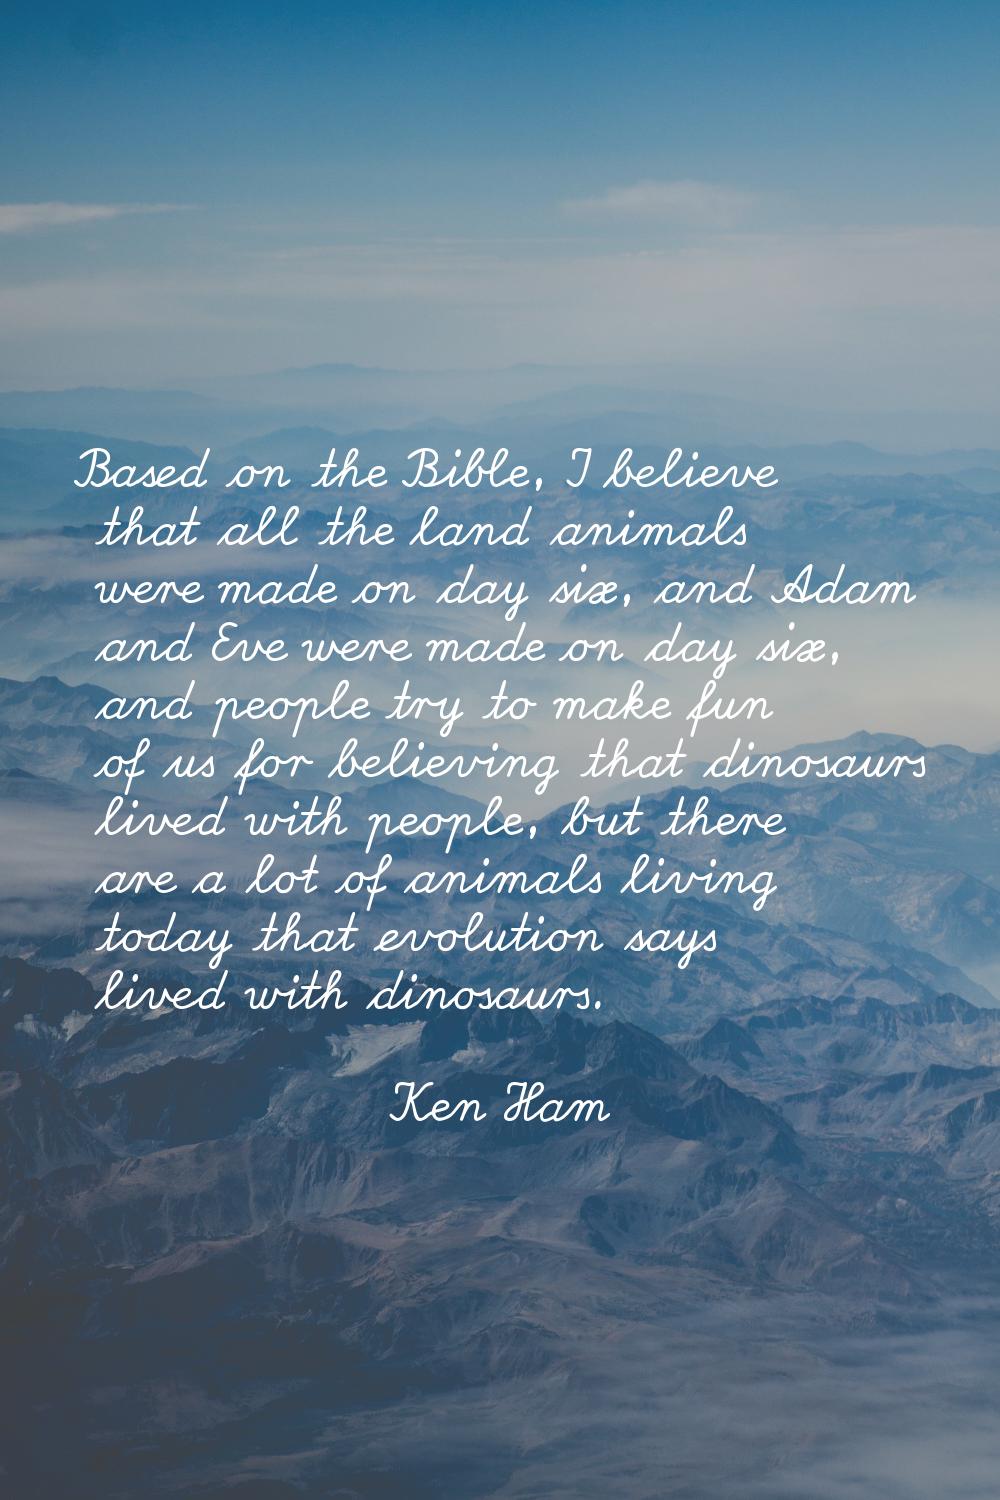 Based on the Bible, I believe that all the land animals were made on day six, and Adam and Eve were